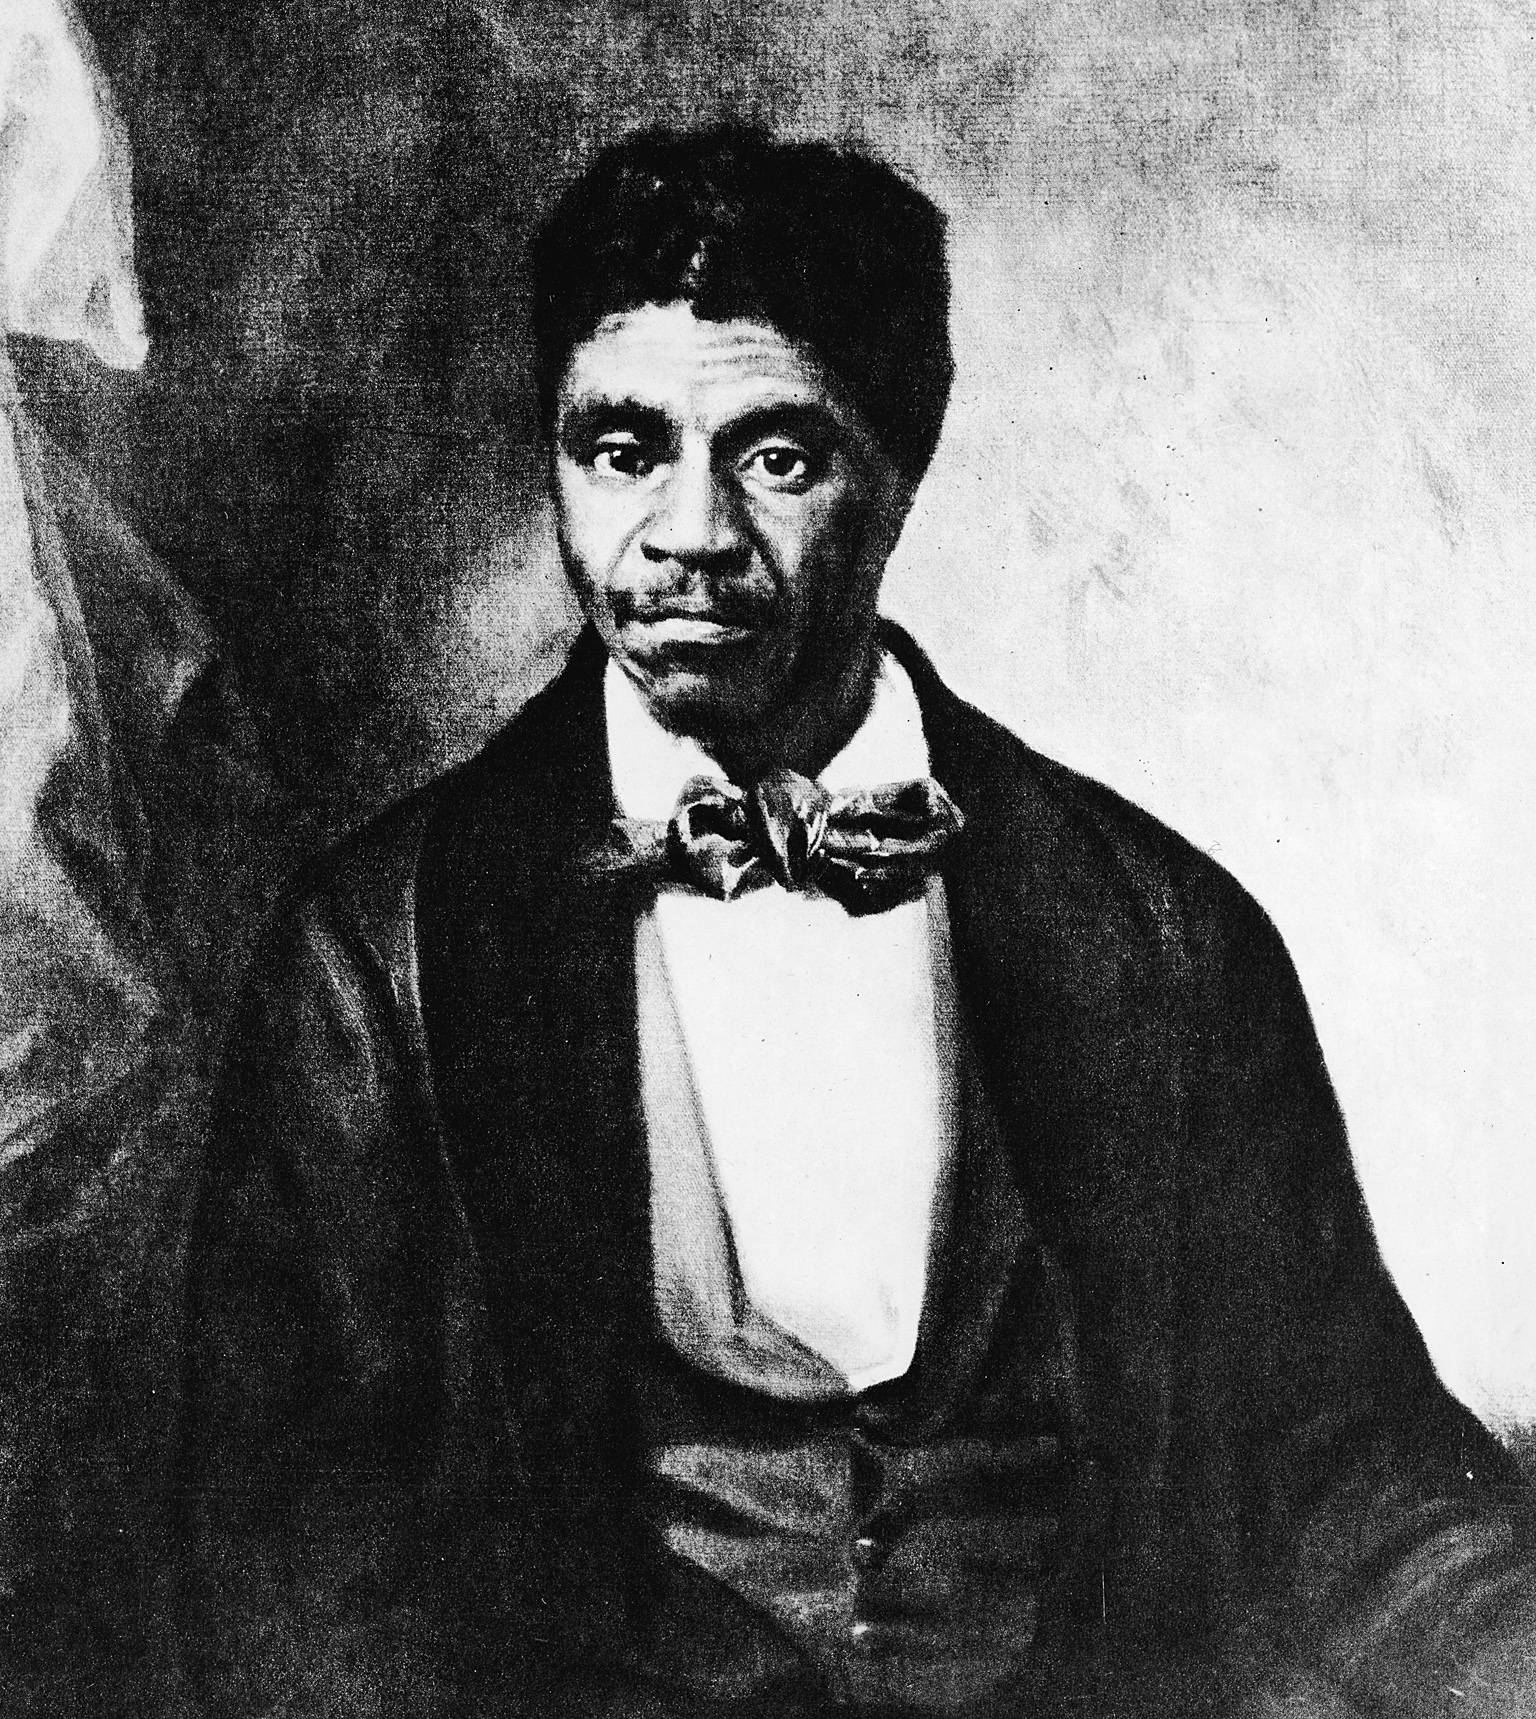 Dred Scott v. Sandford (1857) - Dredd Scott, a slave from Virginia, sued the wife of his master for his freedom after her husband died, but the courts ruled that people of African descent (or their descendants) brought to United States as slaves were not&nbsp; U.S. citizens and therefore not covered by the legal protections in the U.S. Constitution.(Photo: Hulton Archive/Getty Images)